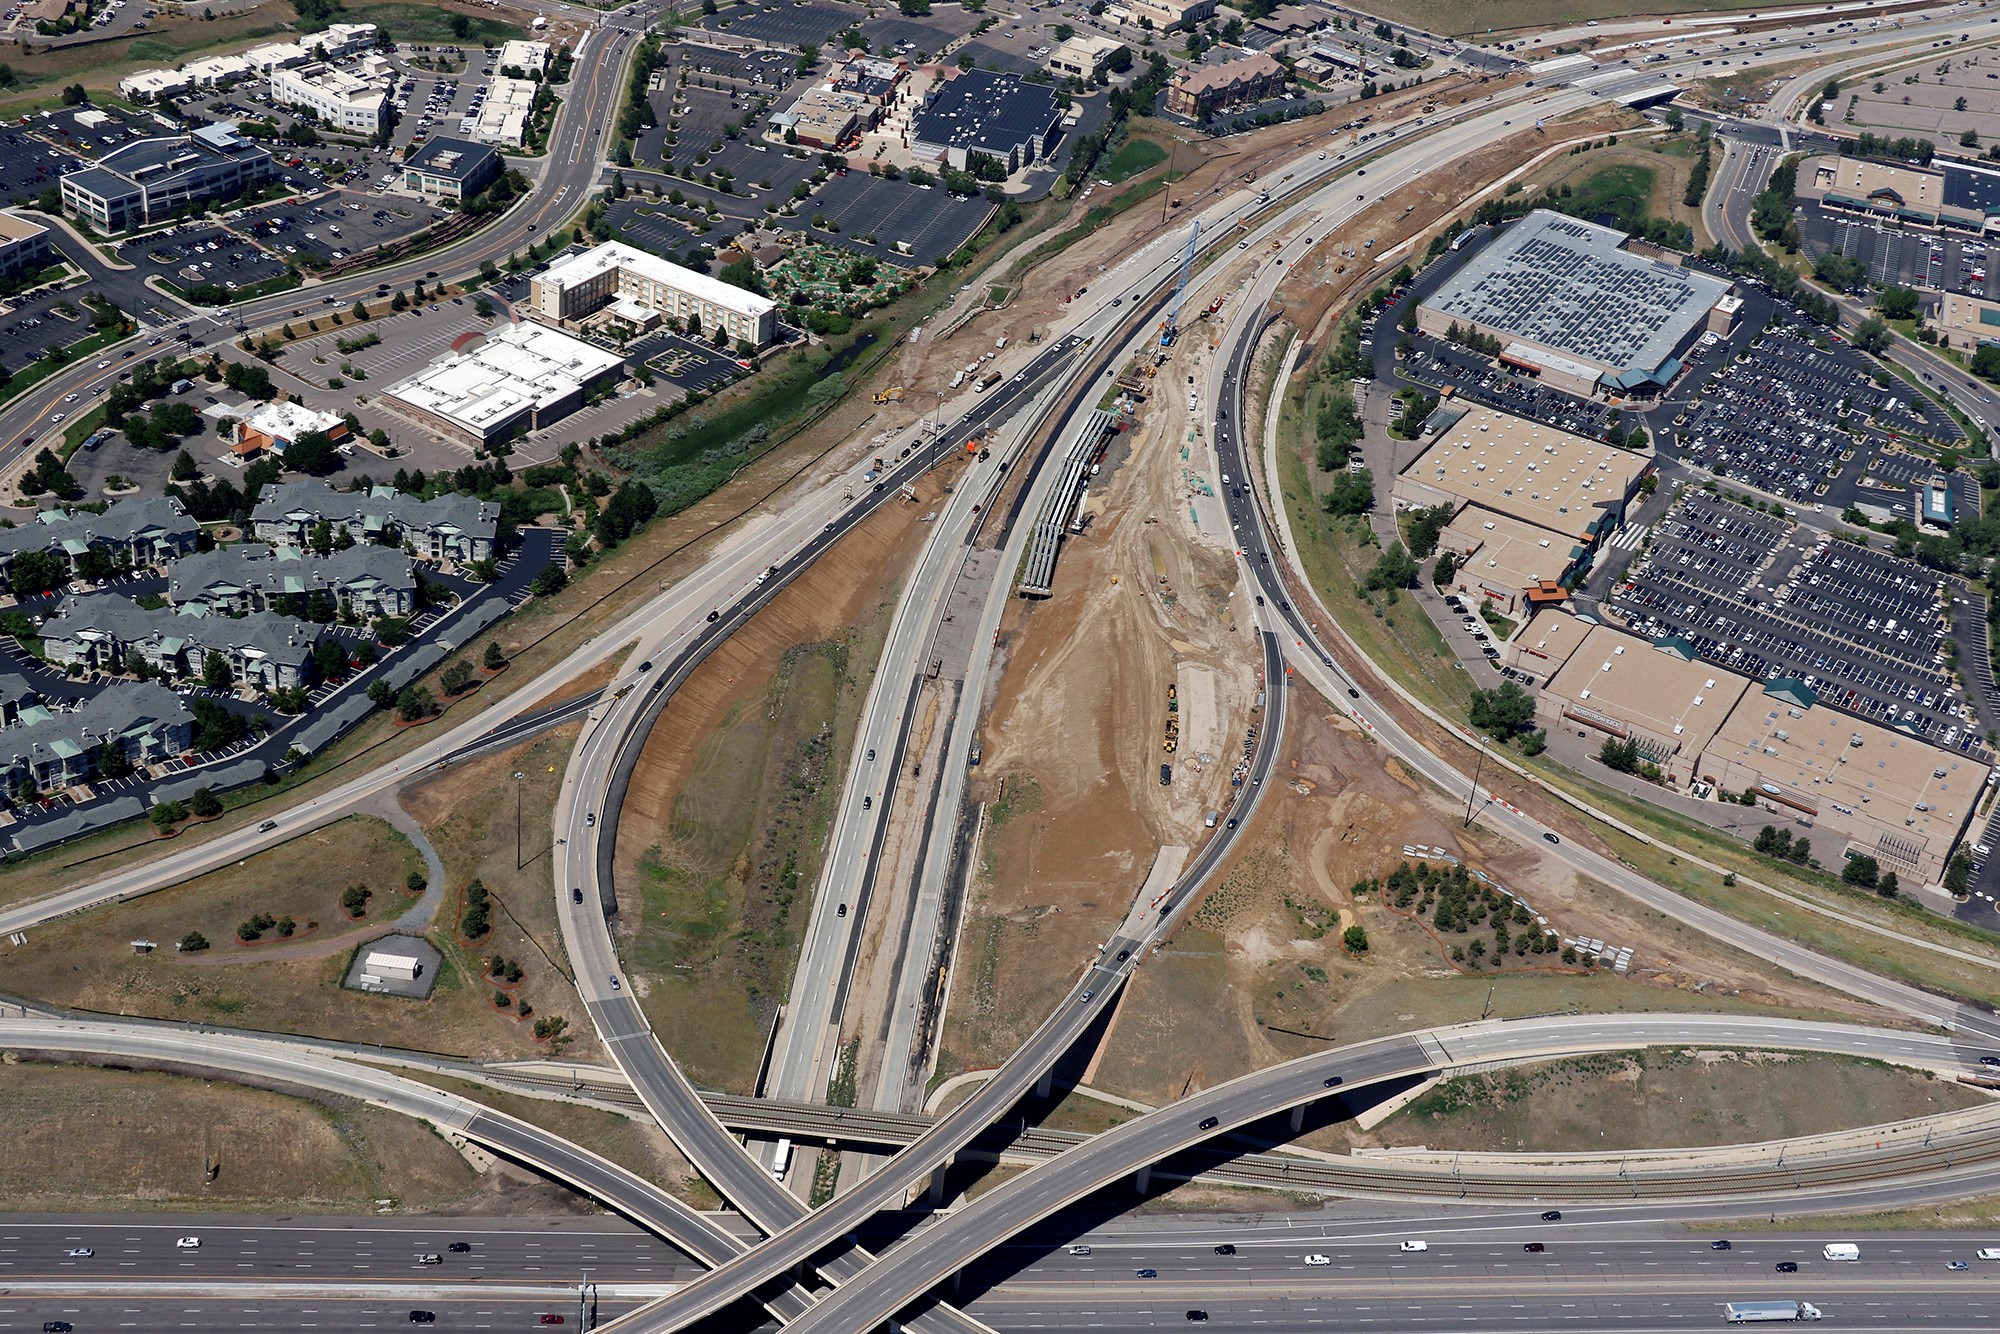 C-470 and I-25 Interchange Aerial View.jpg detail image